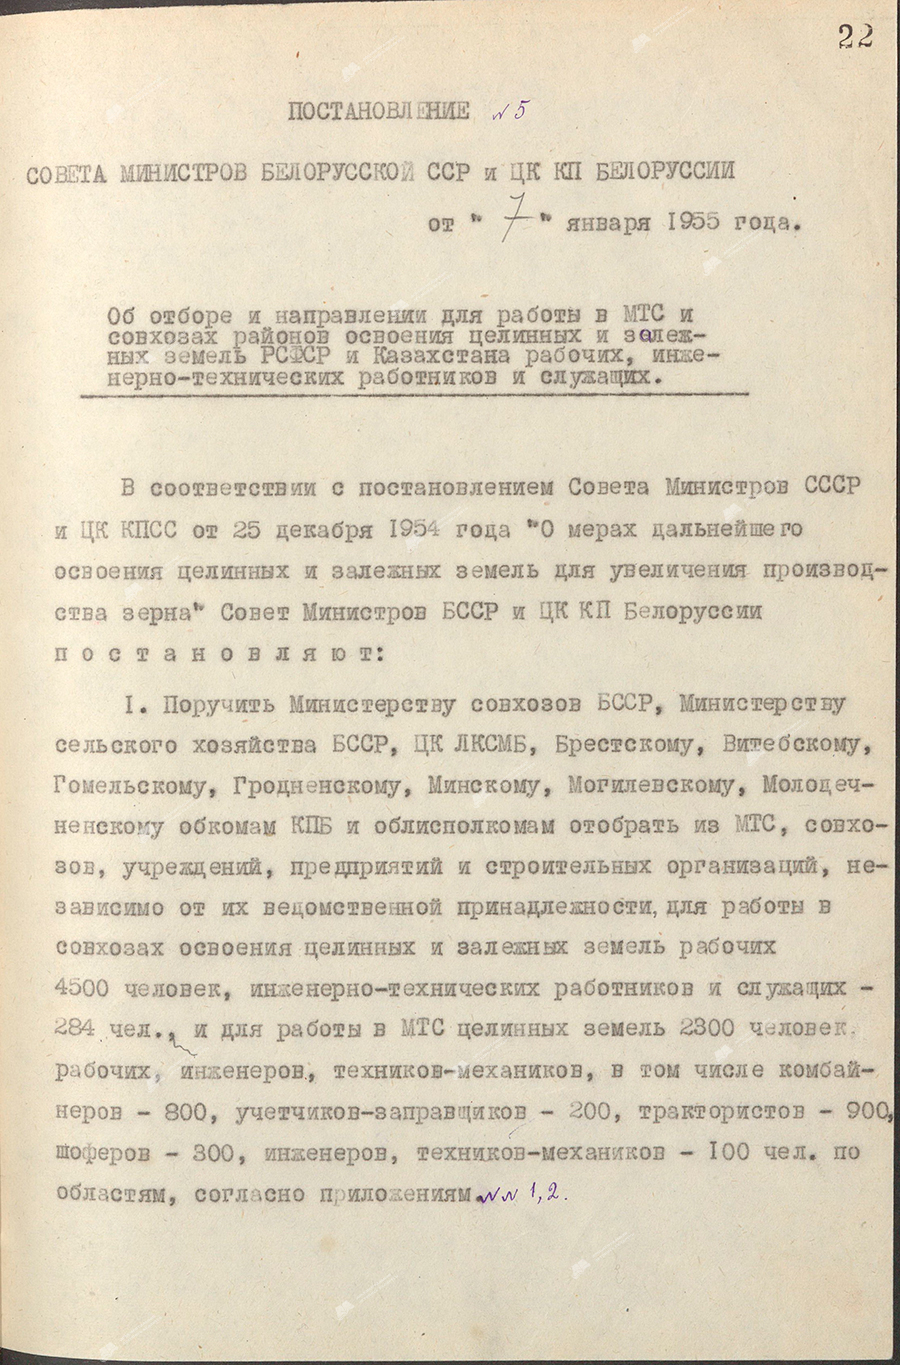 Resolution No. 5 of the Council of Ministers of the BSSR and the Central Committee of the Communist Party of Belarus «On the selection and assignment of workers, engineering and technical workers and employees to work in MTS and state farms in the areas of development of virgin and fallow lands of the RSFSR and Kazakhstan»-с. 0